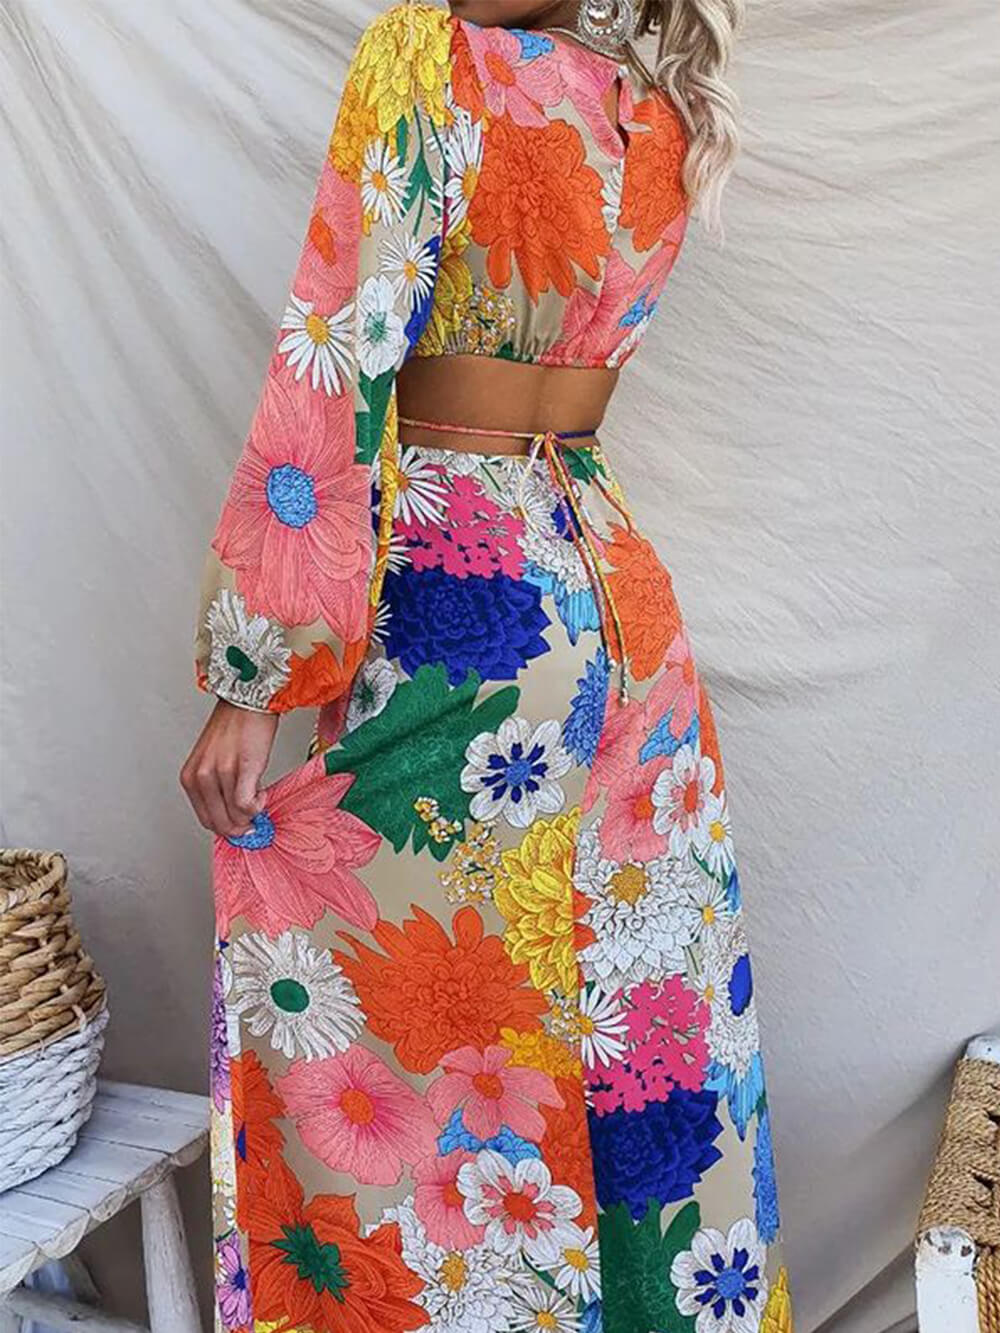 Printed Lace Backless Resort Dress